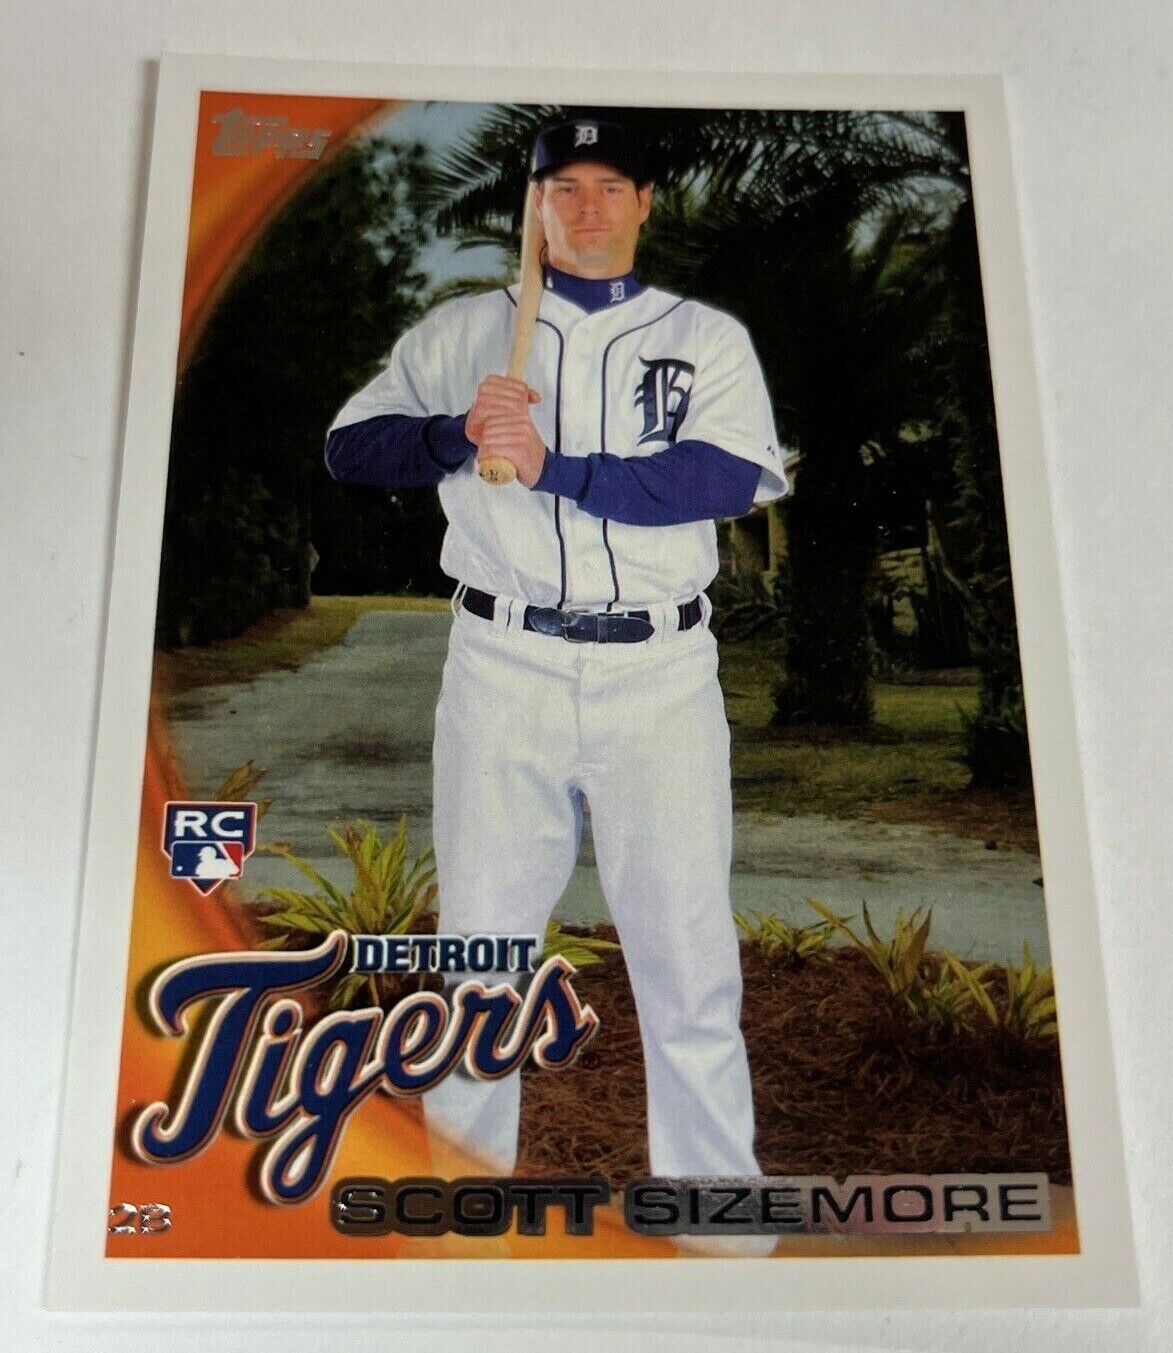 2010 Topps (Series 2) Base Rookie Card #513 Scott Sizemore (Detroit Tigers). rookie card picture